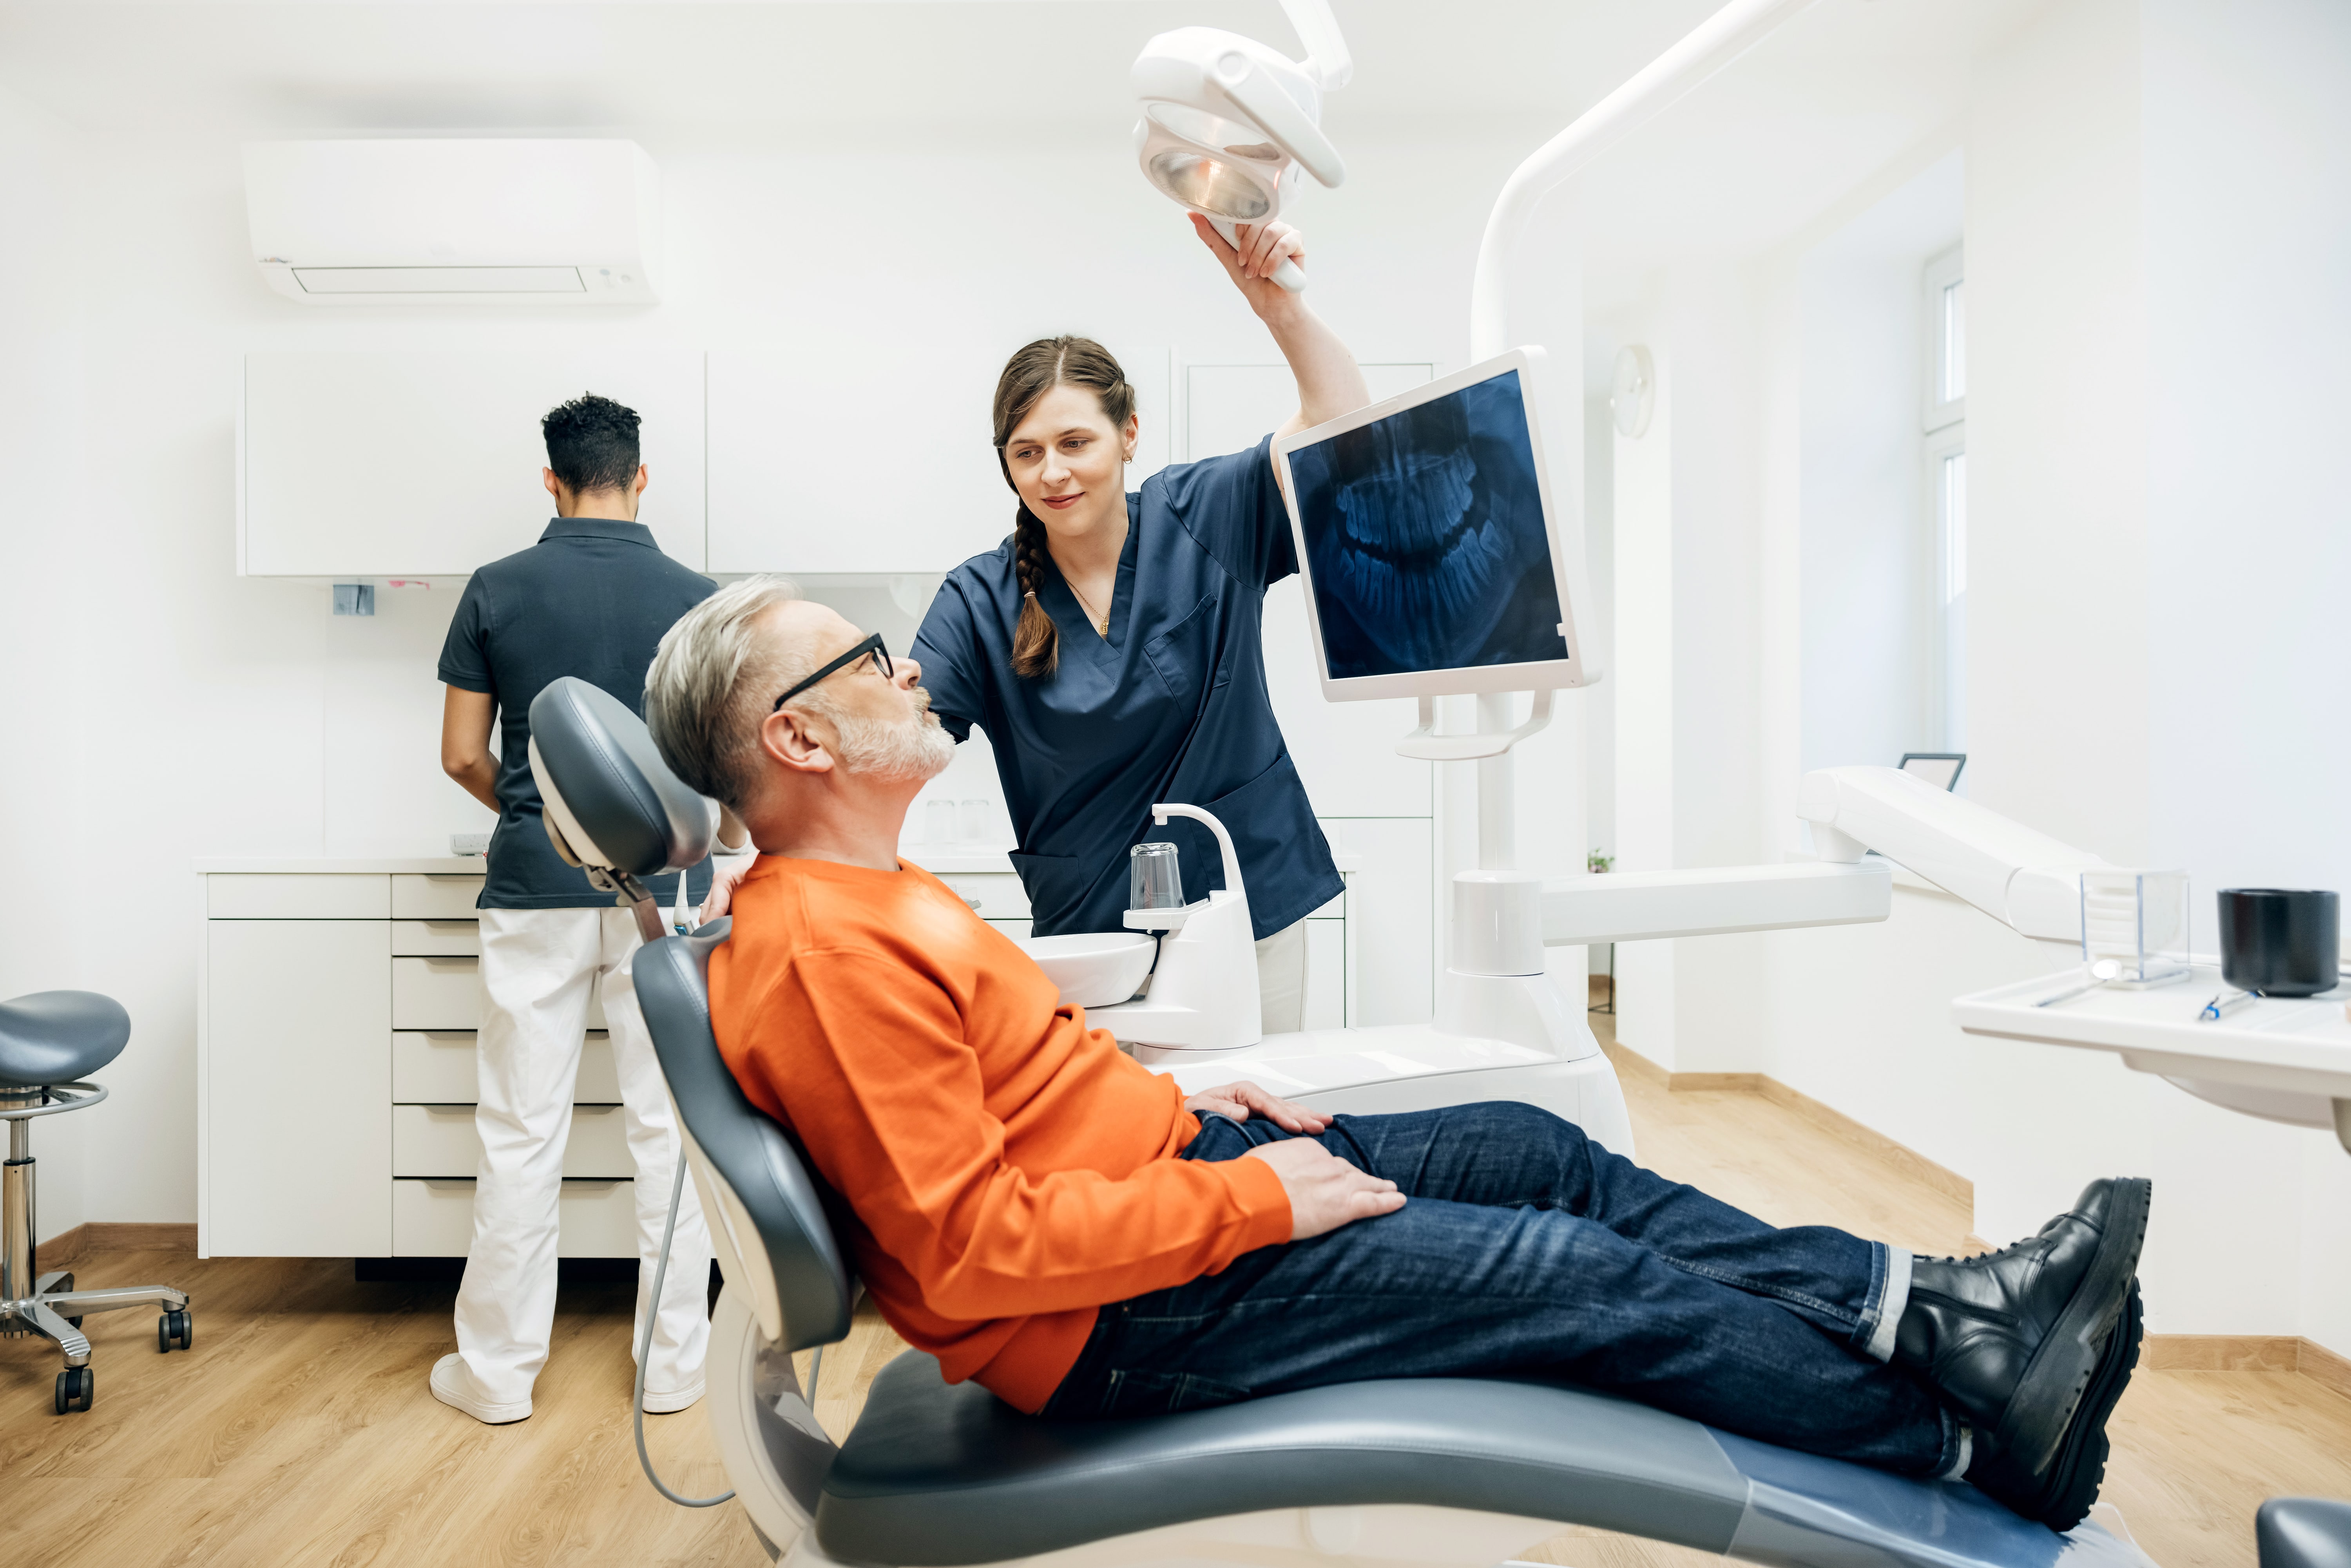 A dental assistant adjusting an overhead light during a check up on a patient sitting back in a mechanical chair while the orthodontist prepares for a procedure.